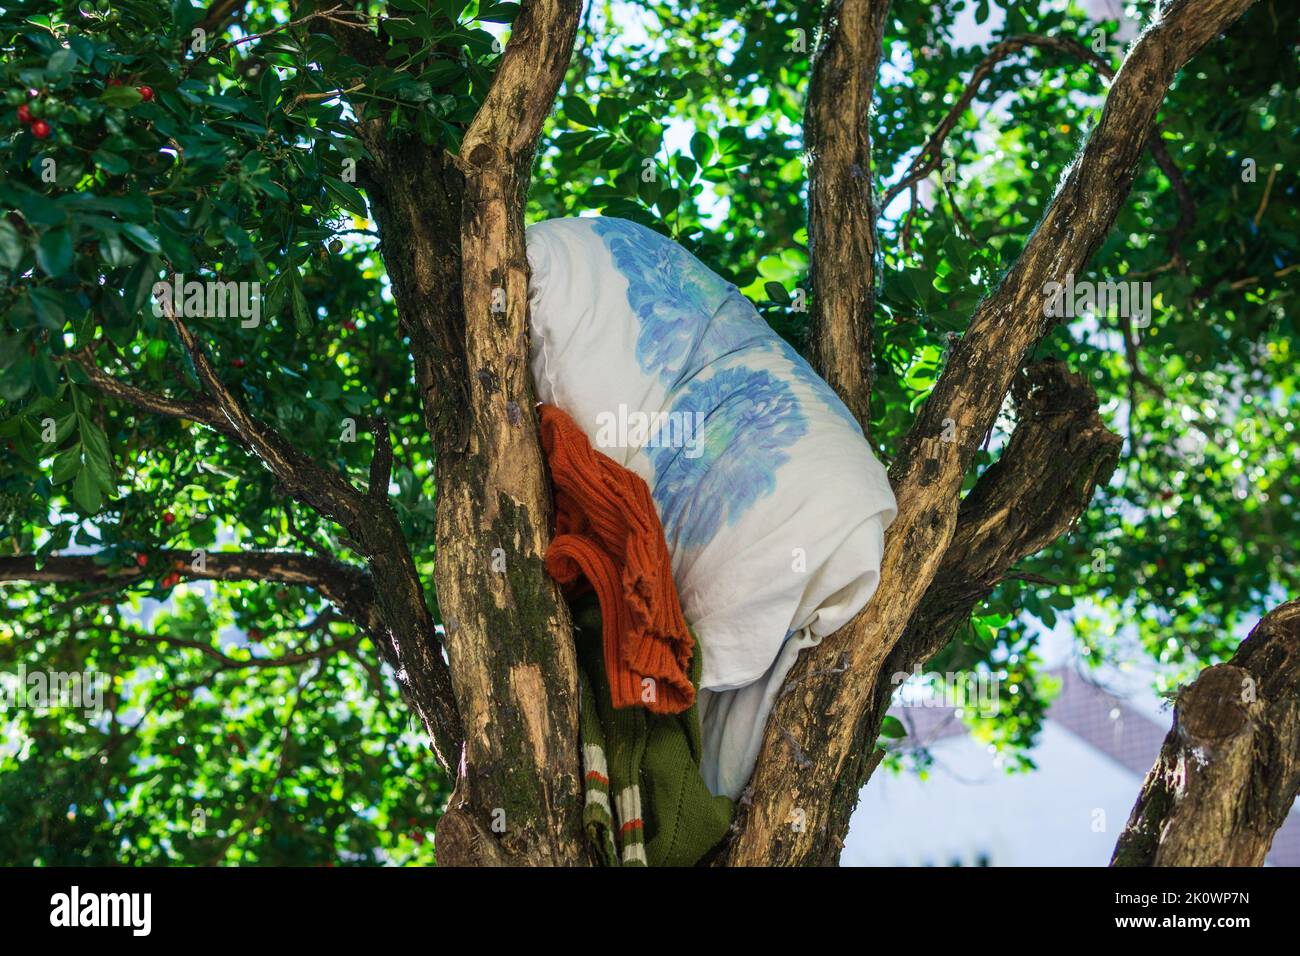 Homeless bedding and personal belongings stowed on tree branches in Belo Horizonte, Minas Gerais, Brazil. Stock Photo